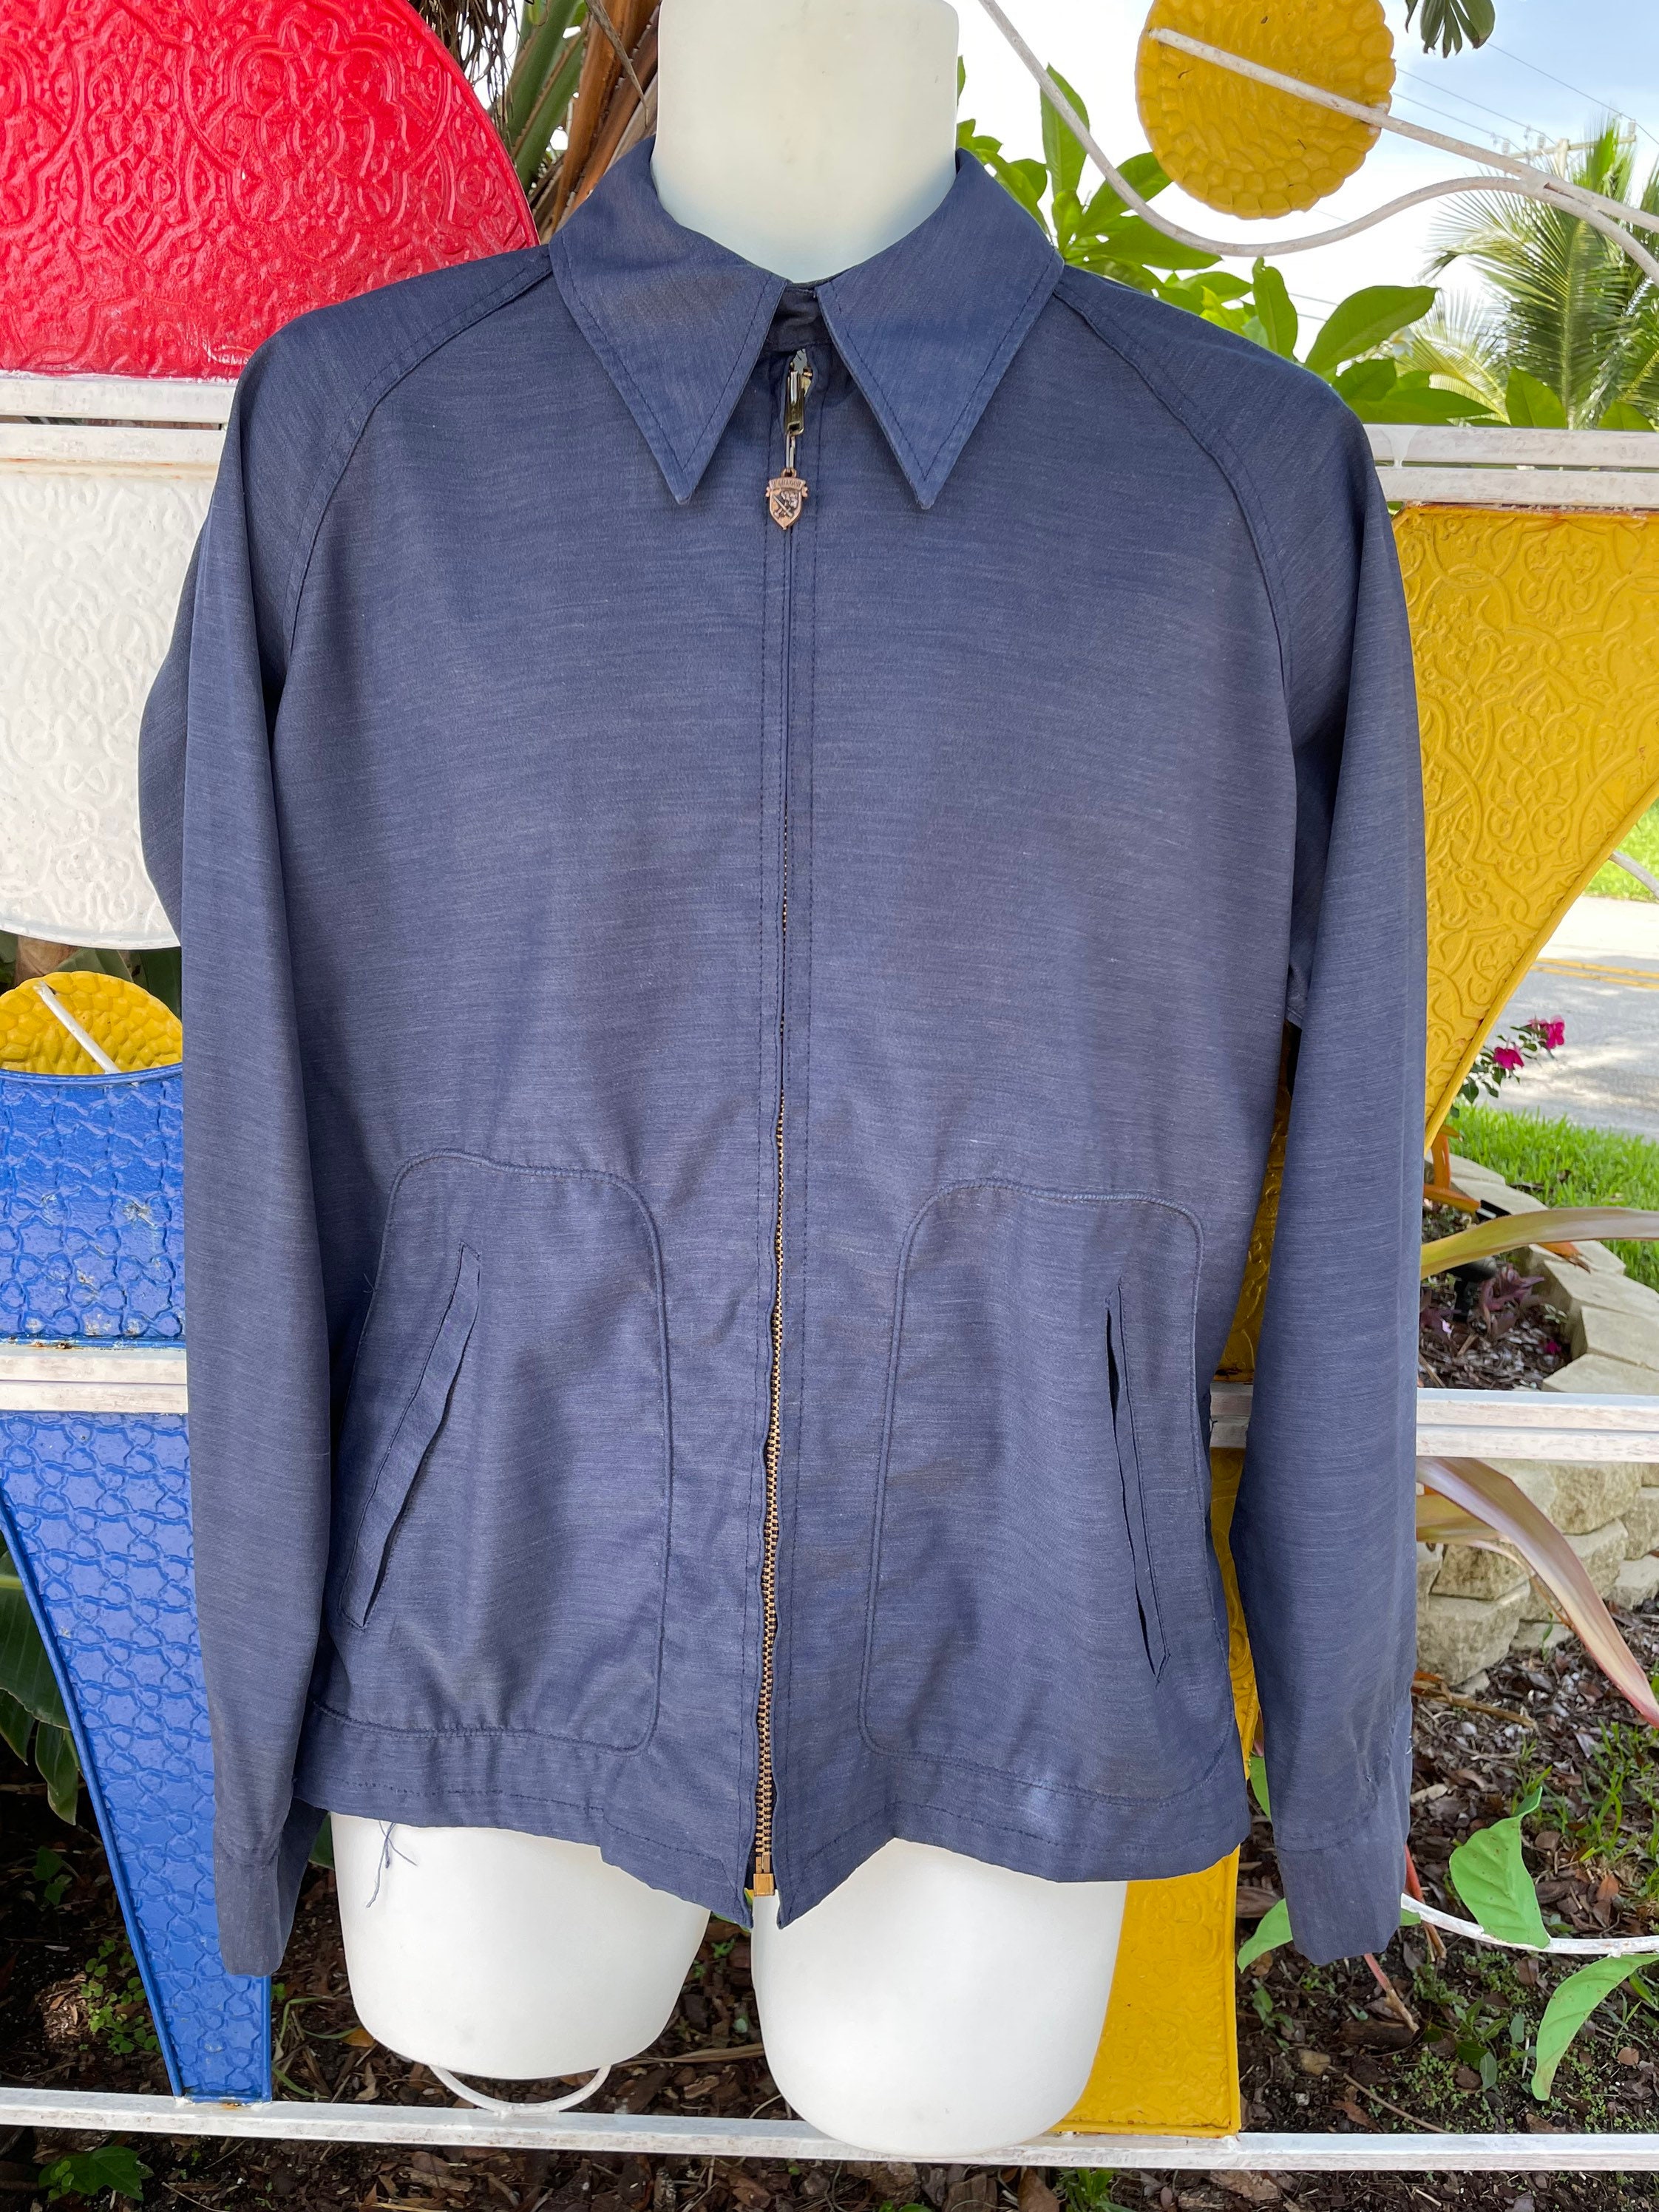 Mcgregor Drizzler 1960s Mens All Weather Jacket - Etsy